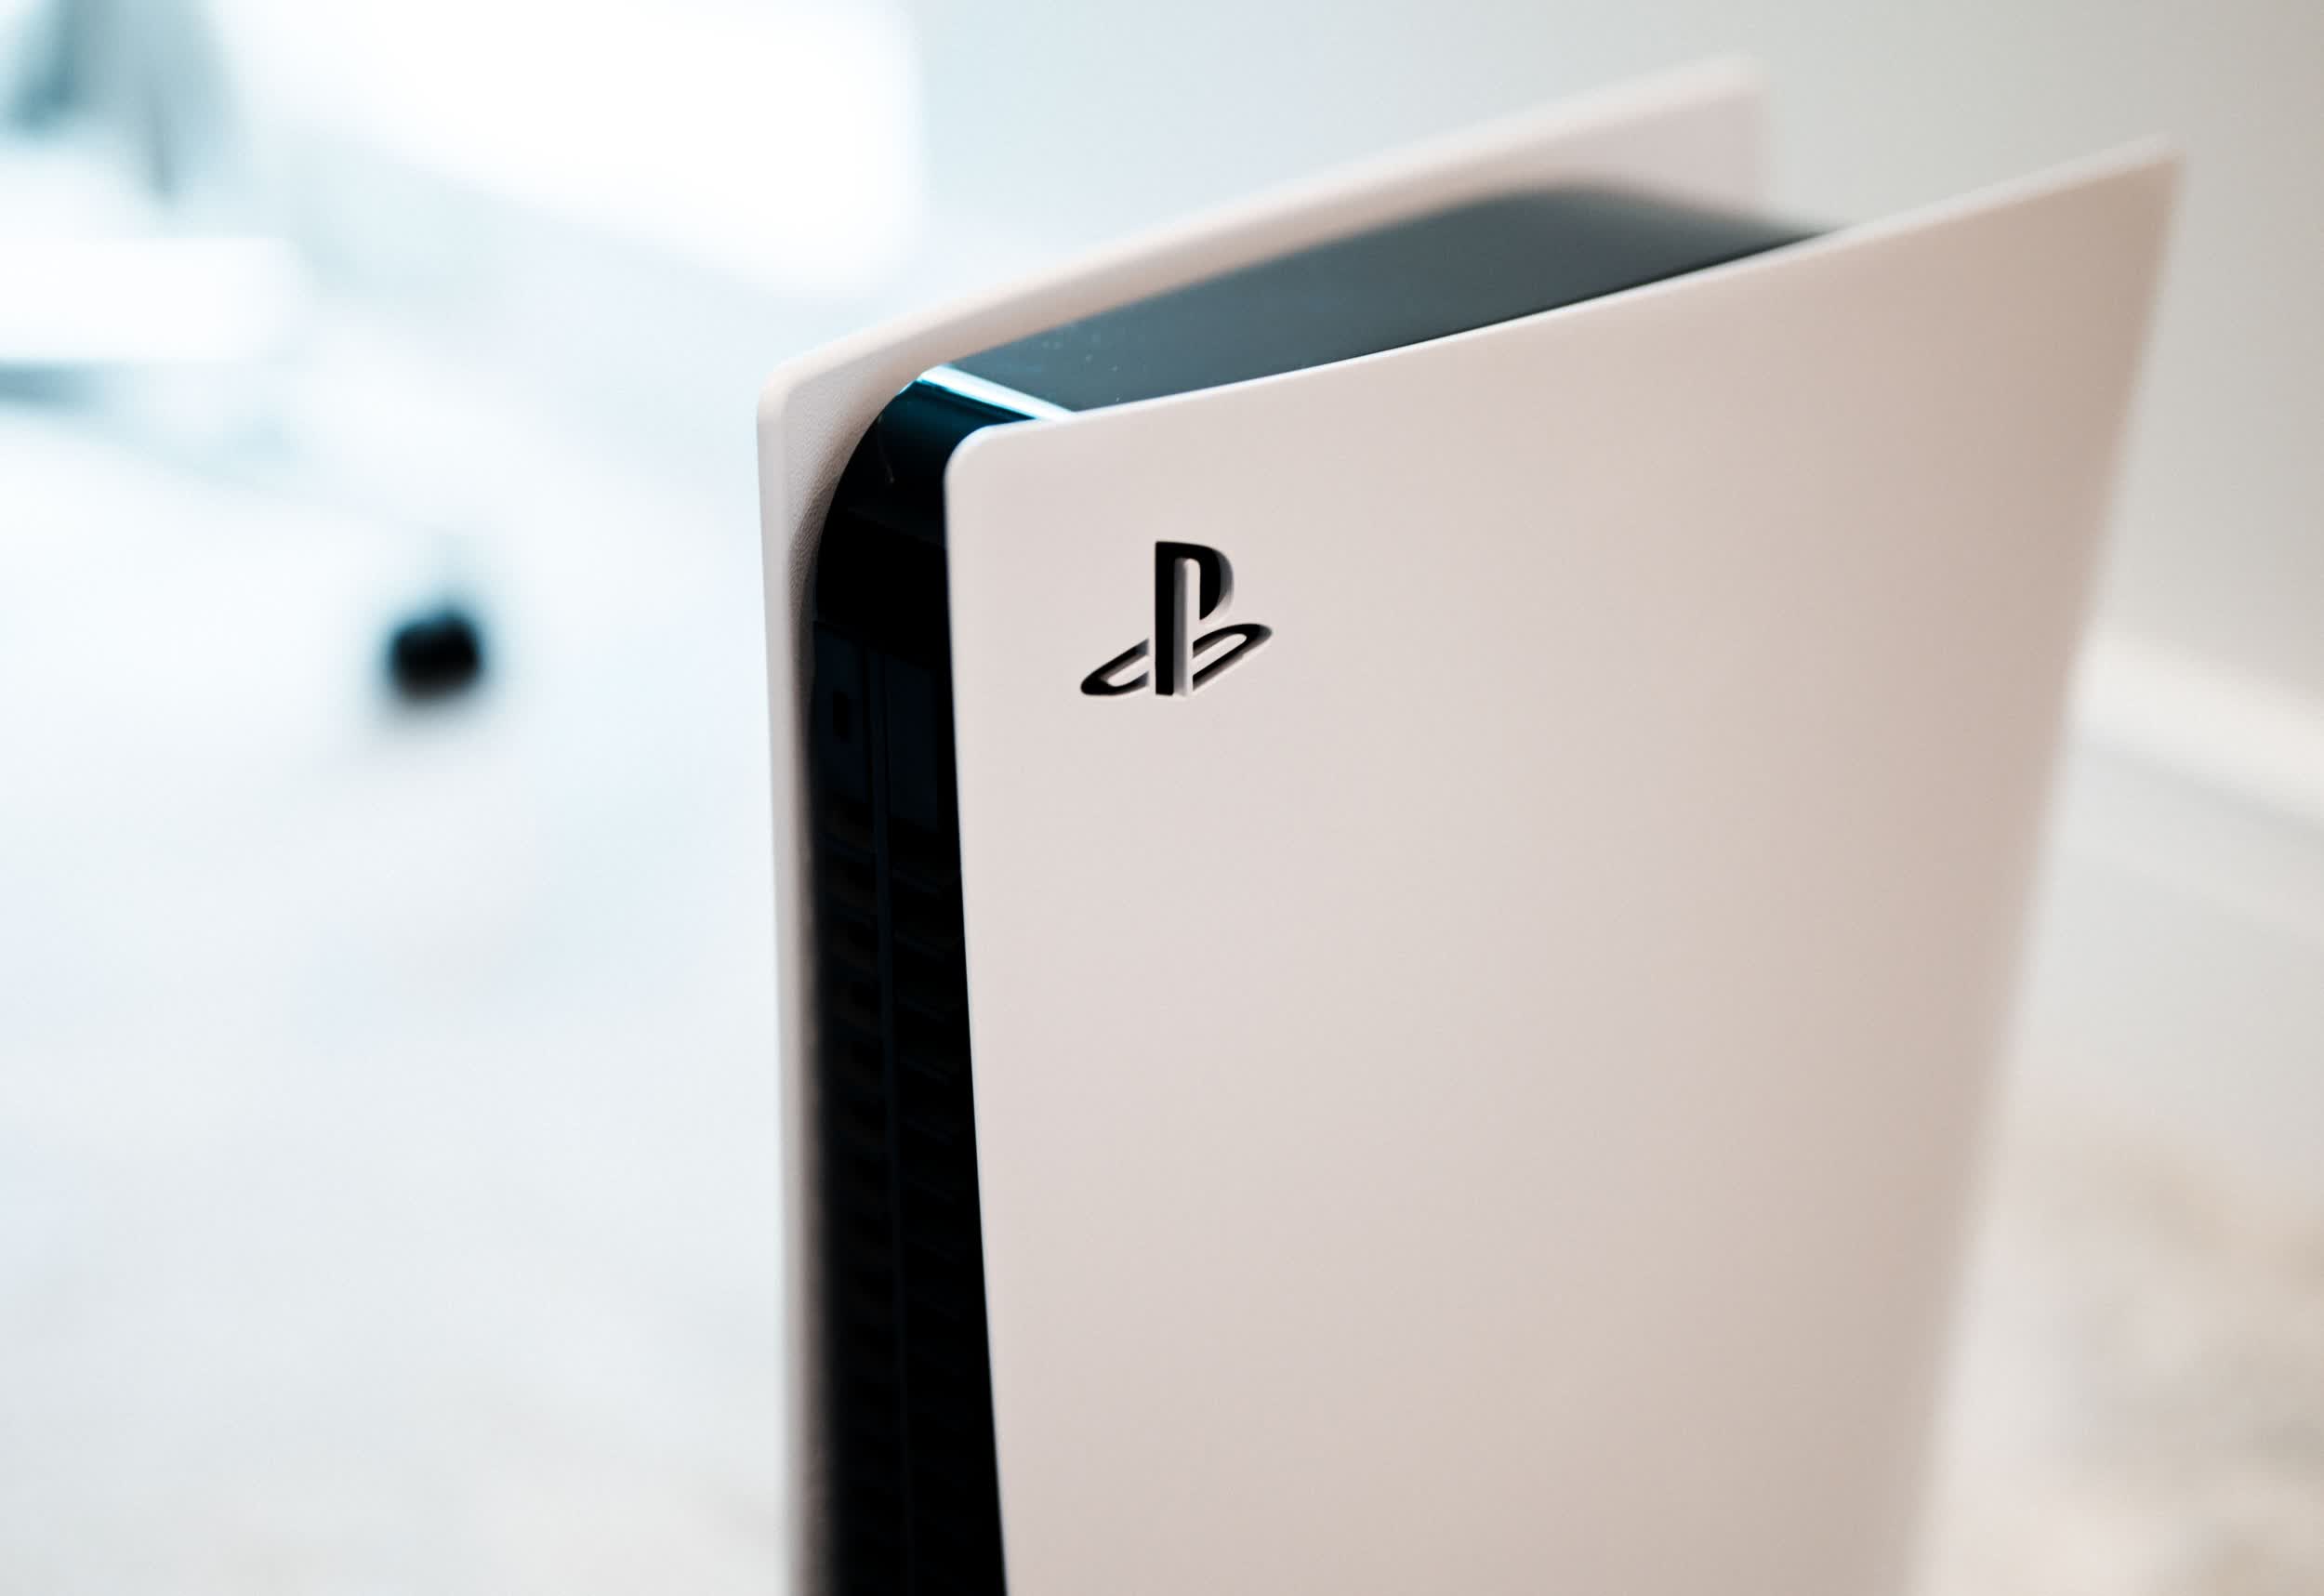 Die shot reveals new PS5 model moves to new 6nm Oberon Plus chip